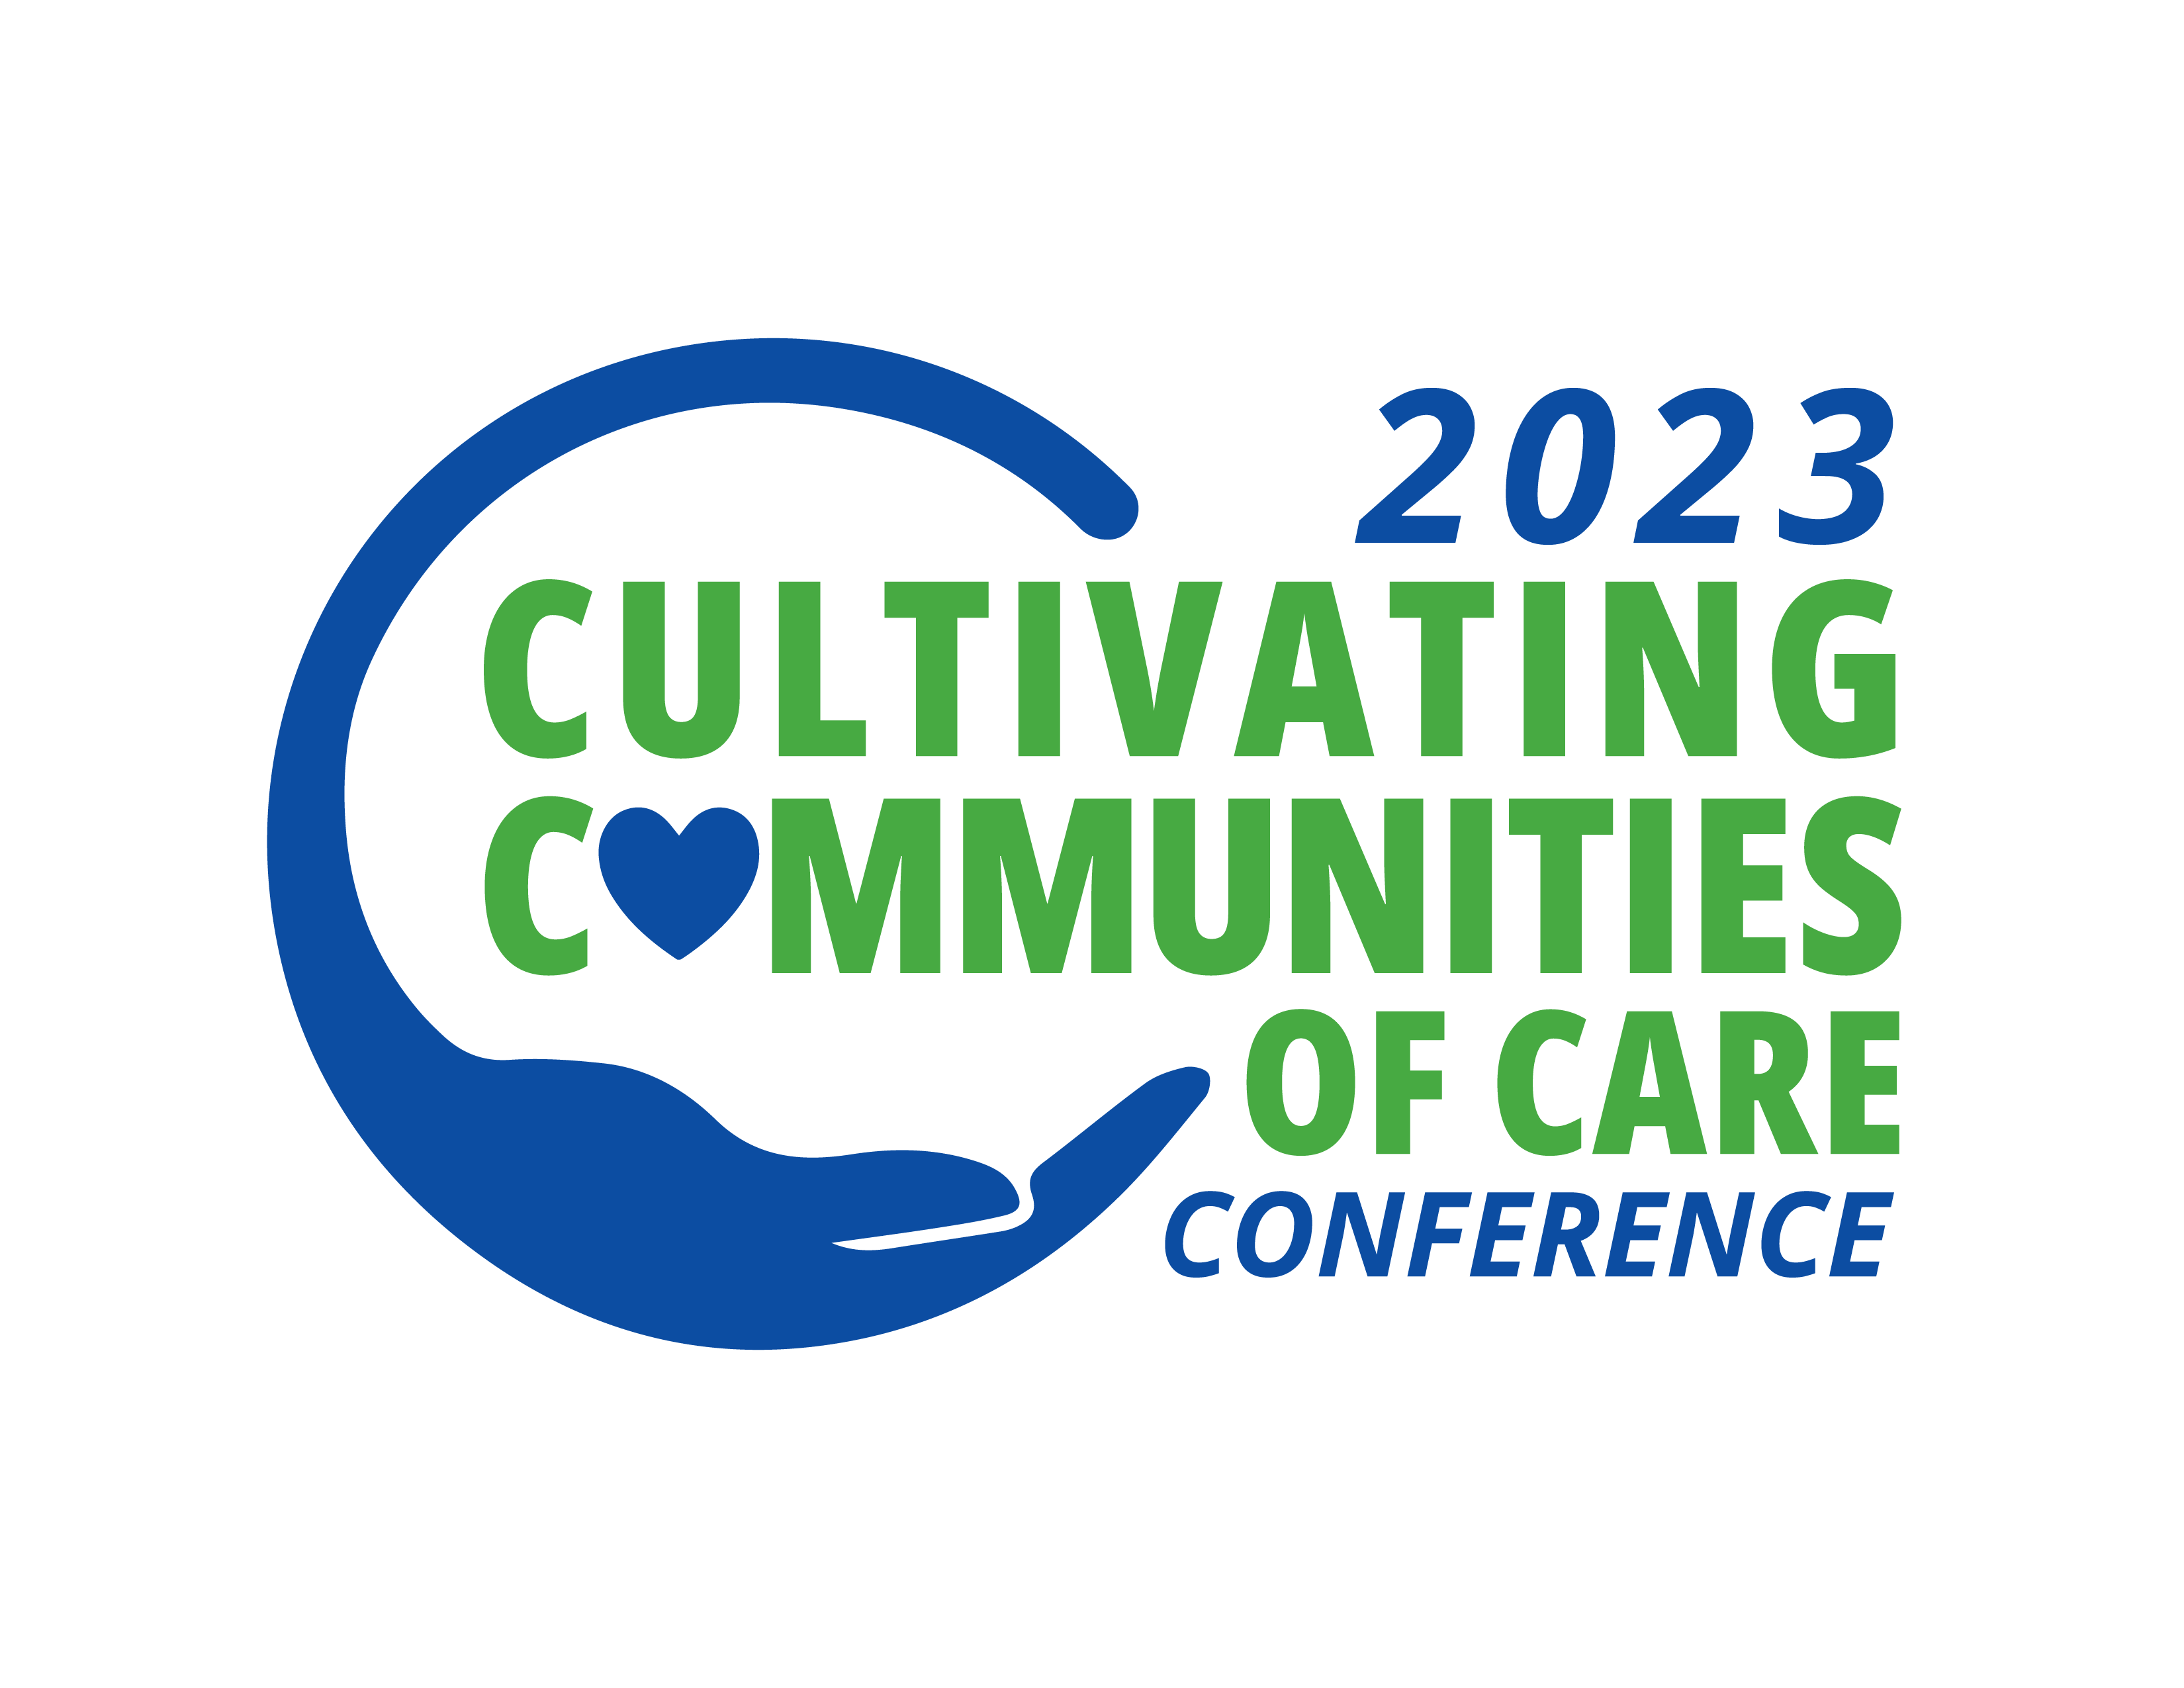 Cultivating Communities of Care Conference